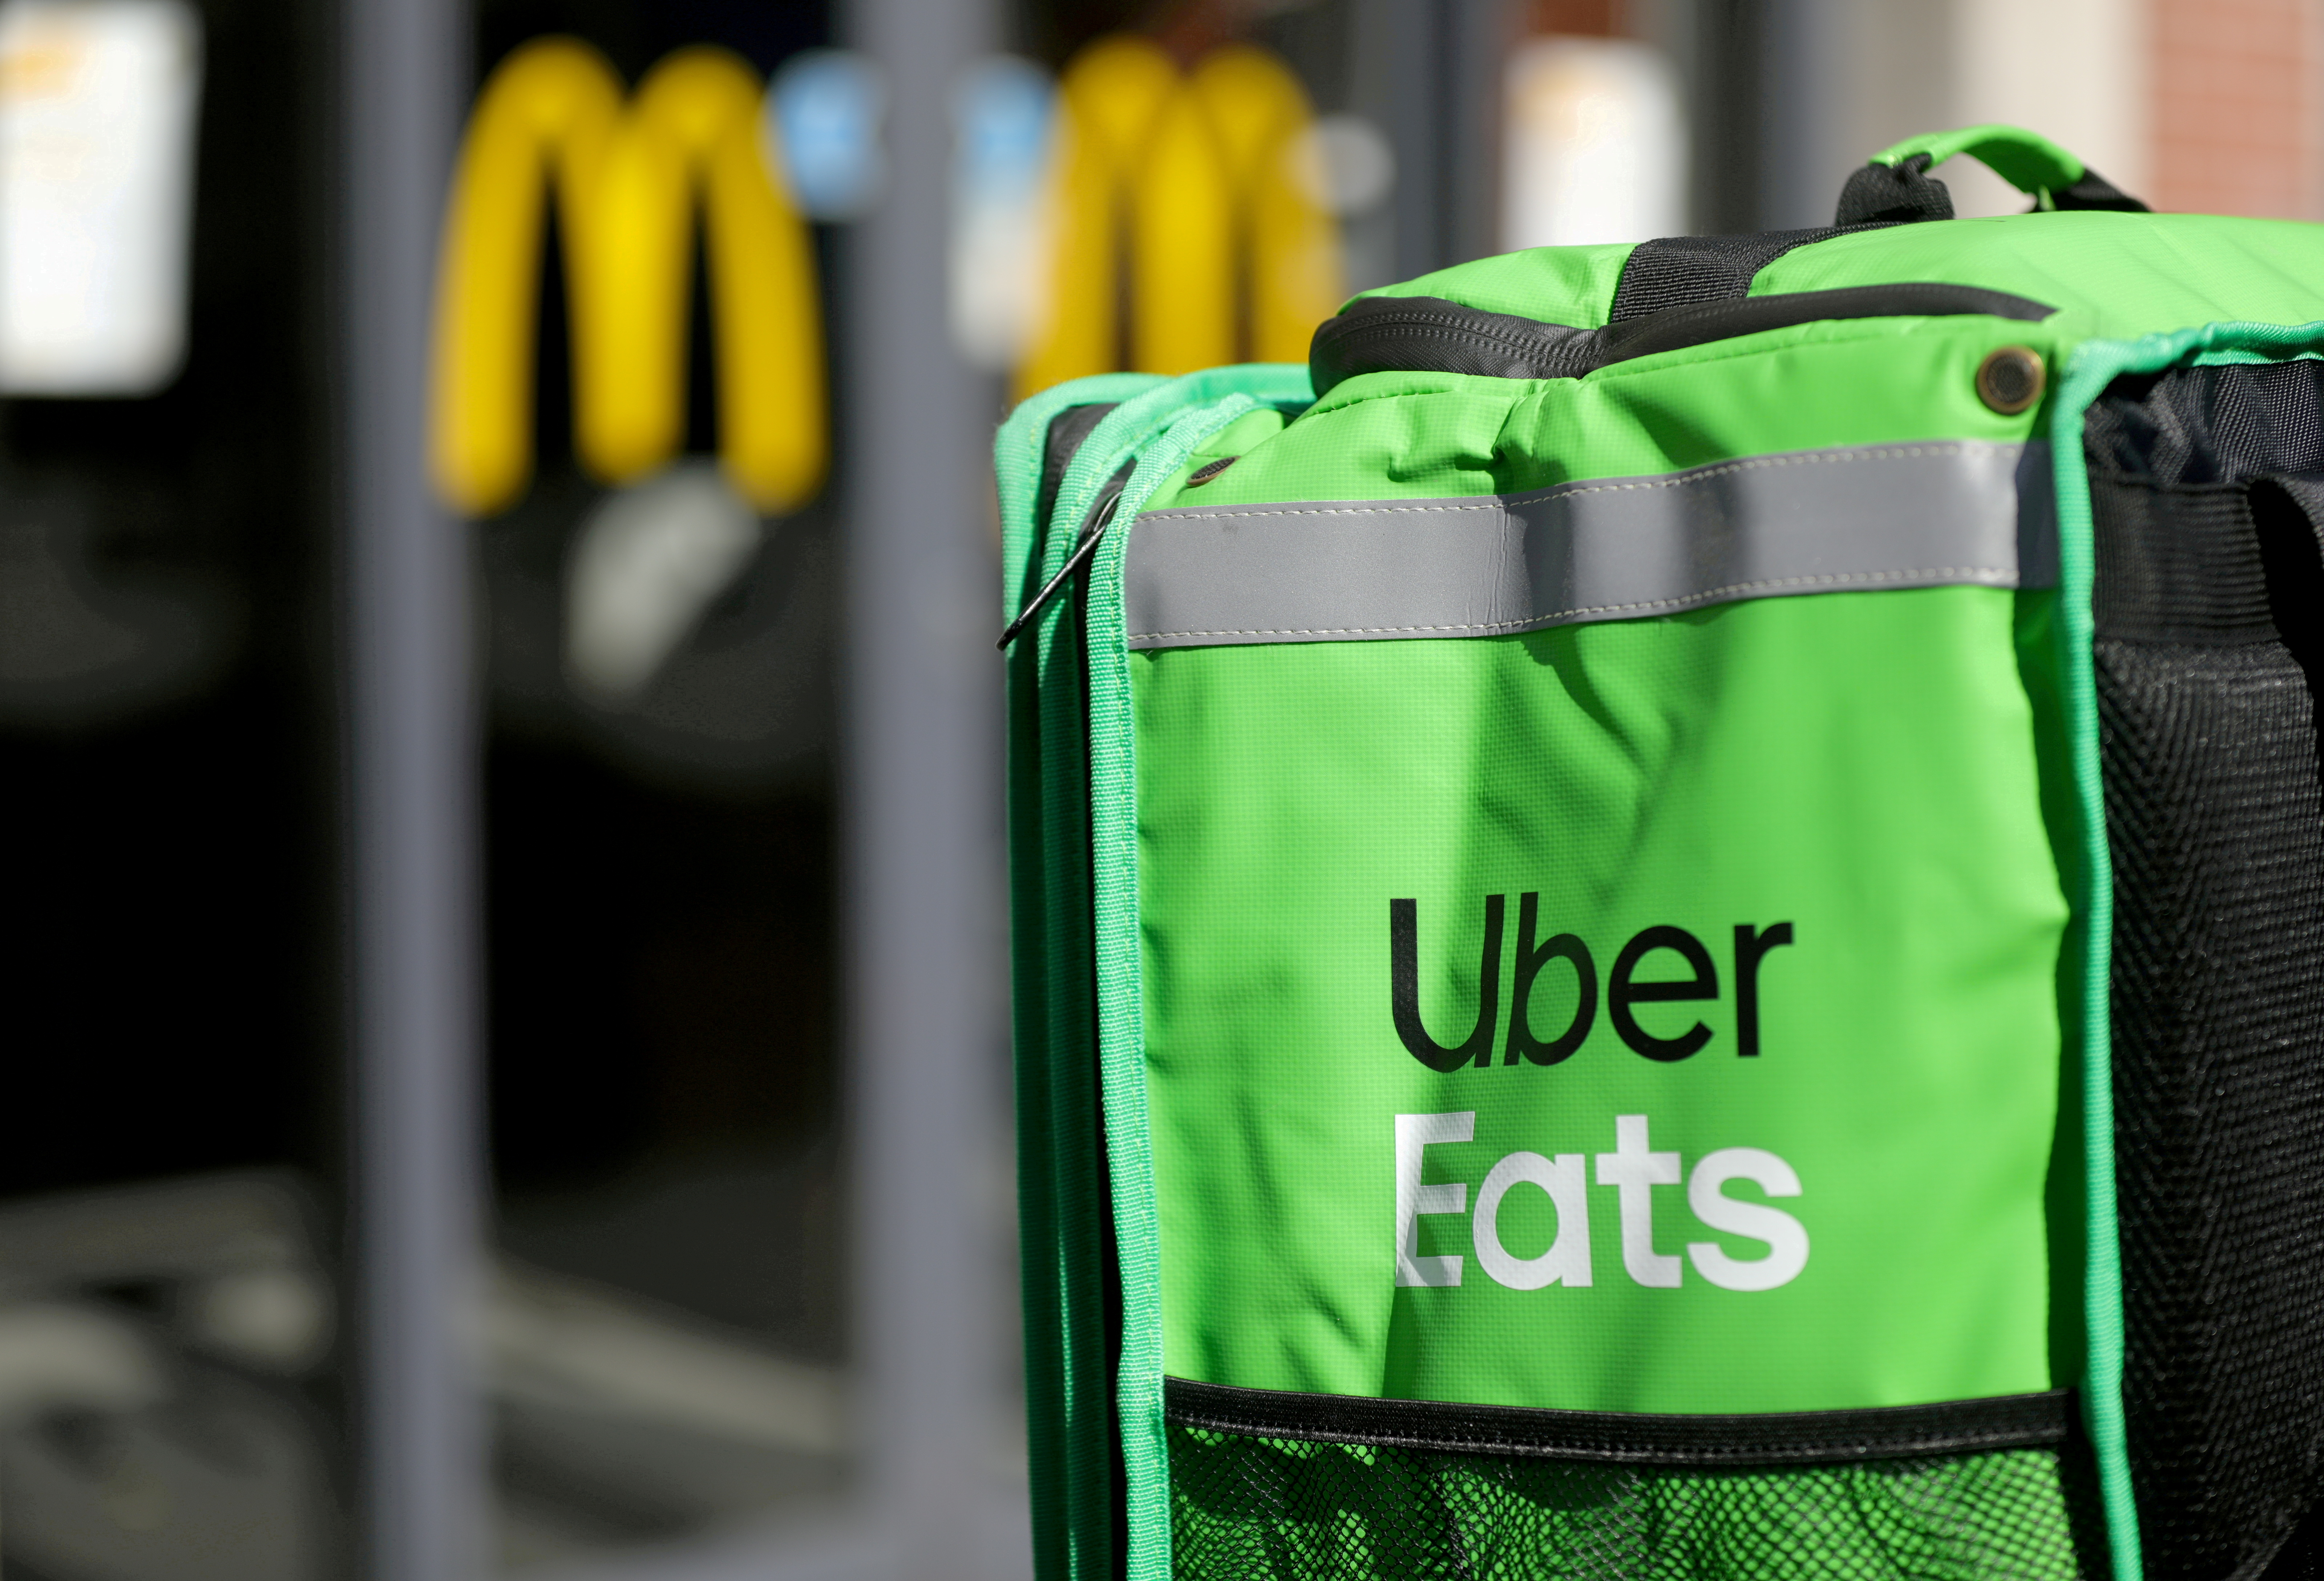 An Uber Eats delivery bag is seen in this photo. REUTERS/Eva Plevier